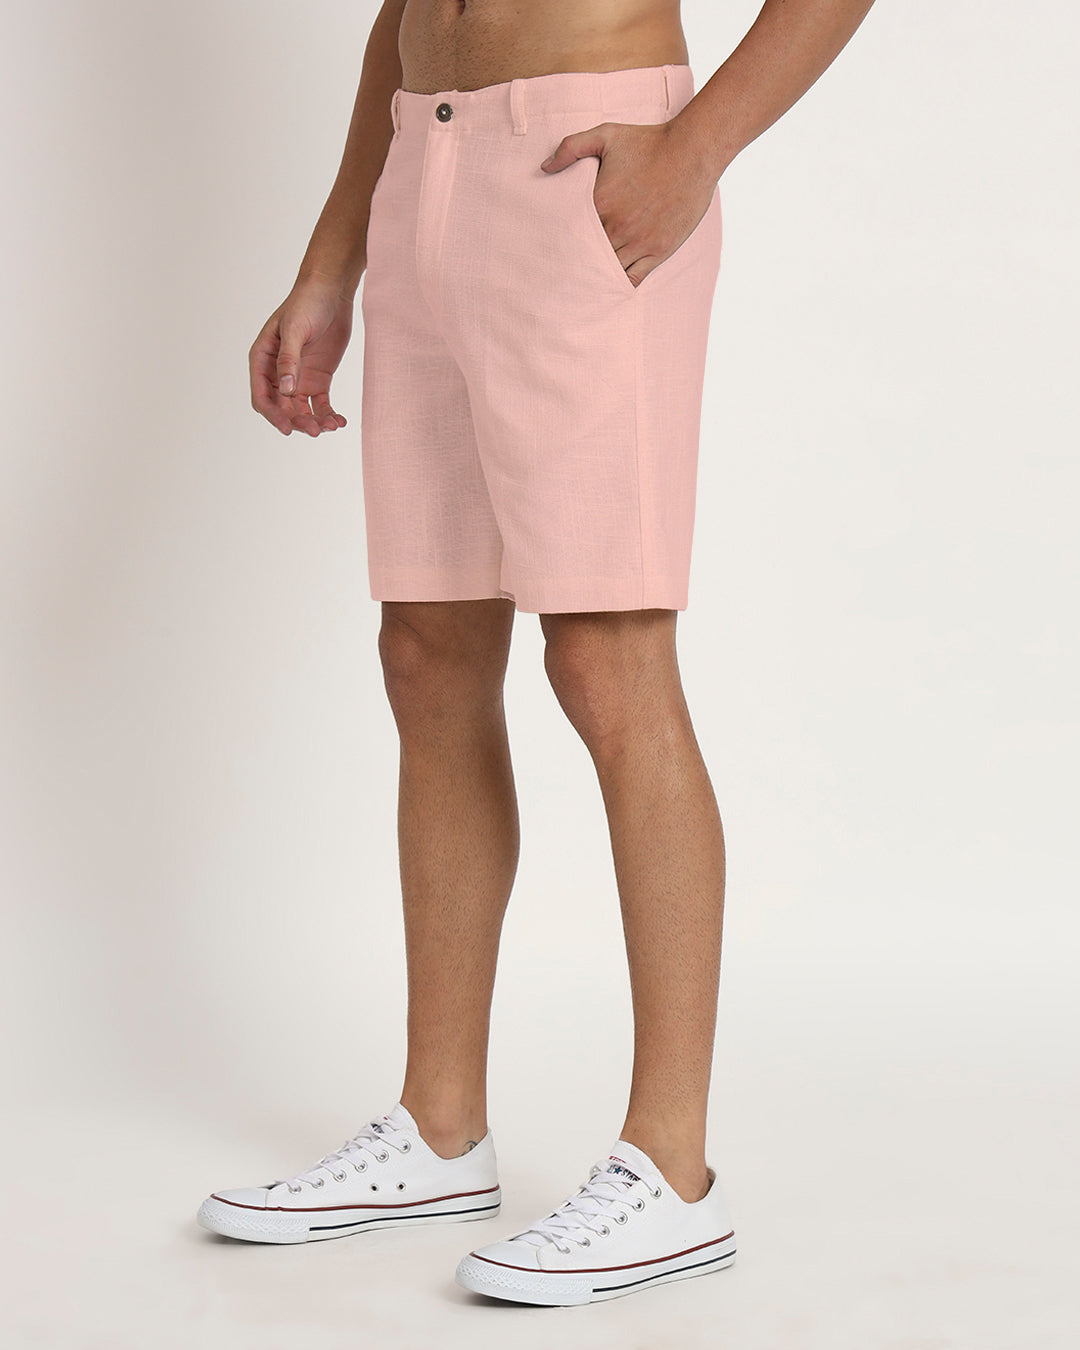 Combo : Ready For Anything Grey & Fondant Pink Men's Shorts